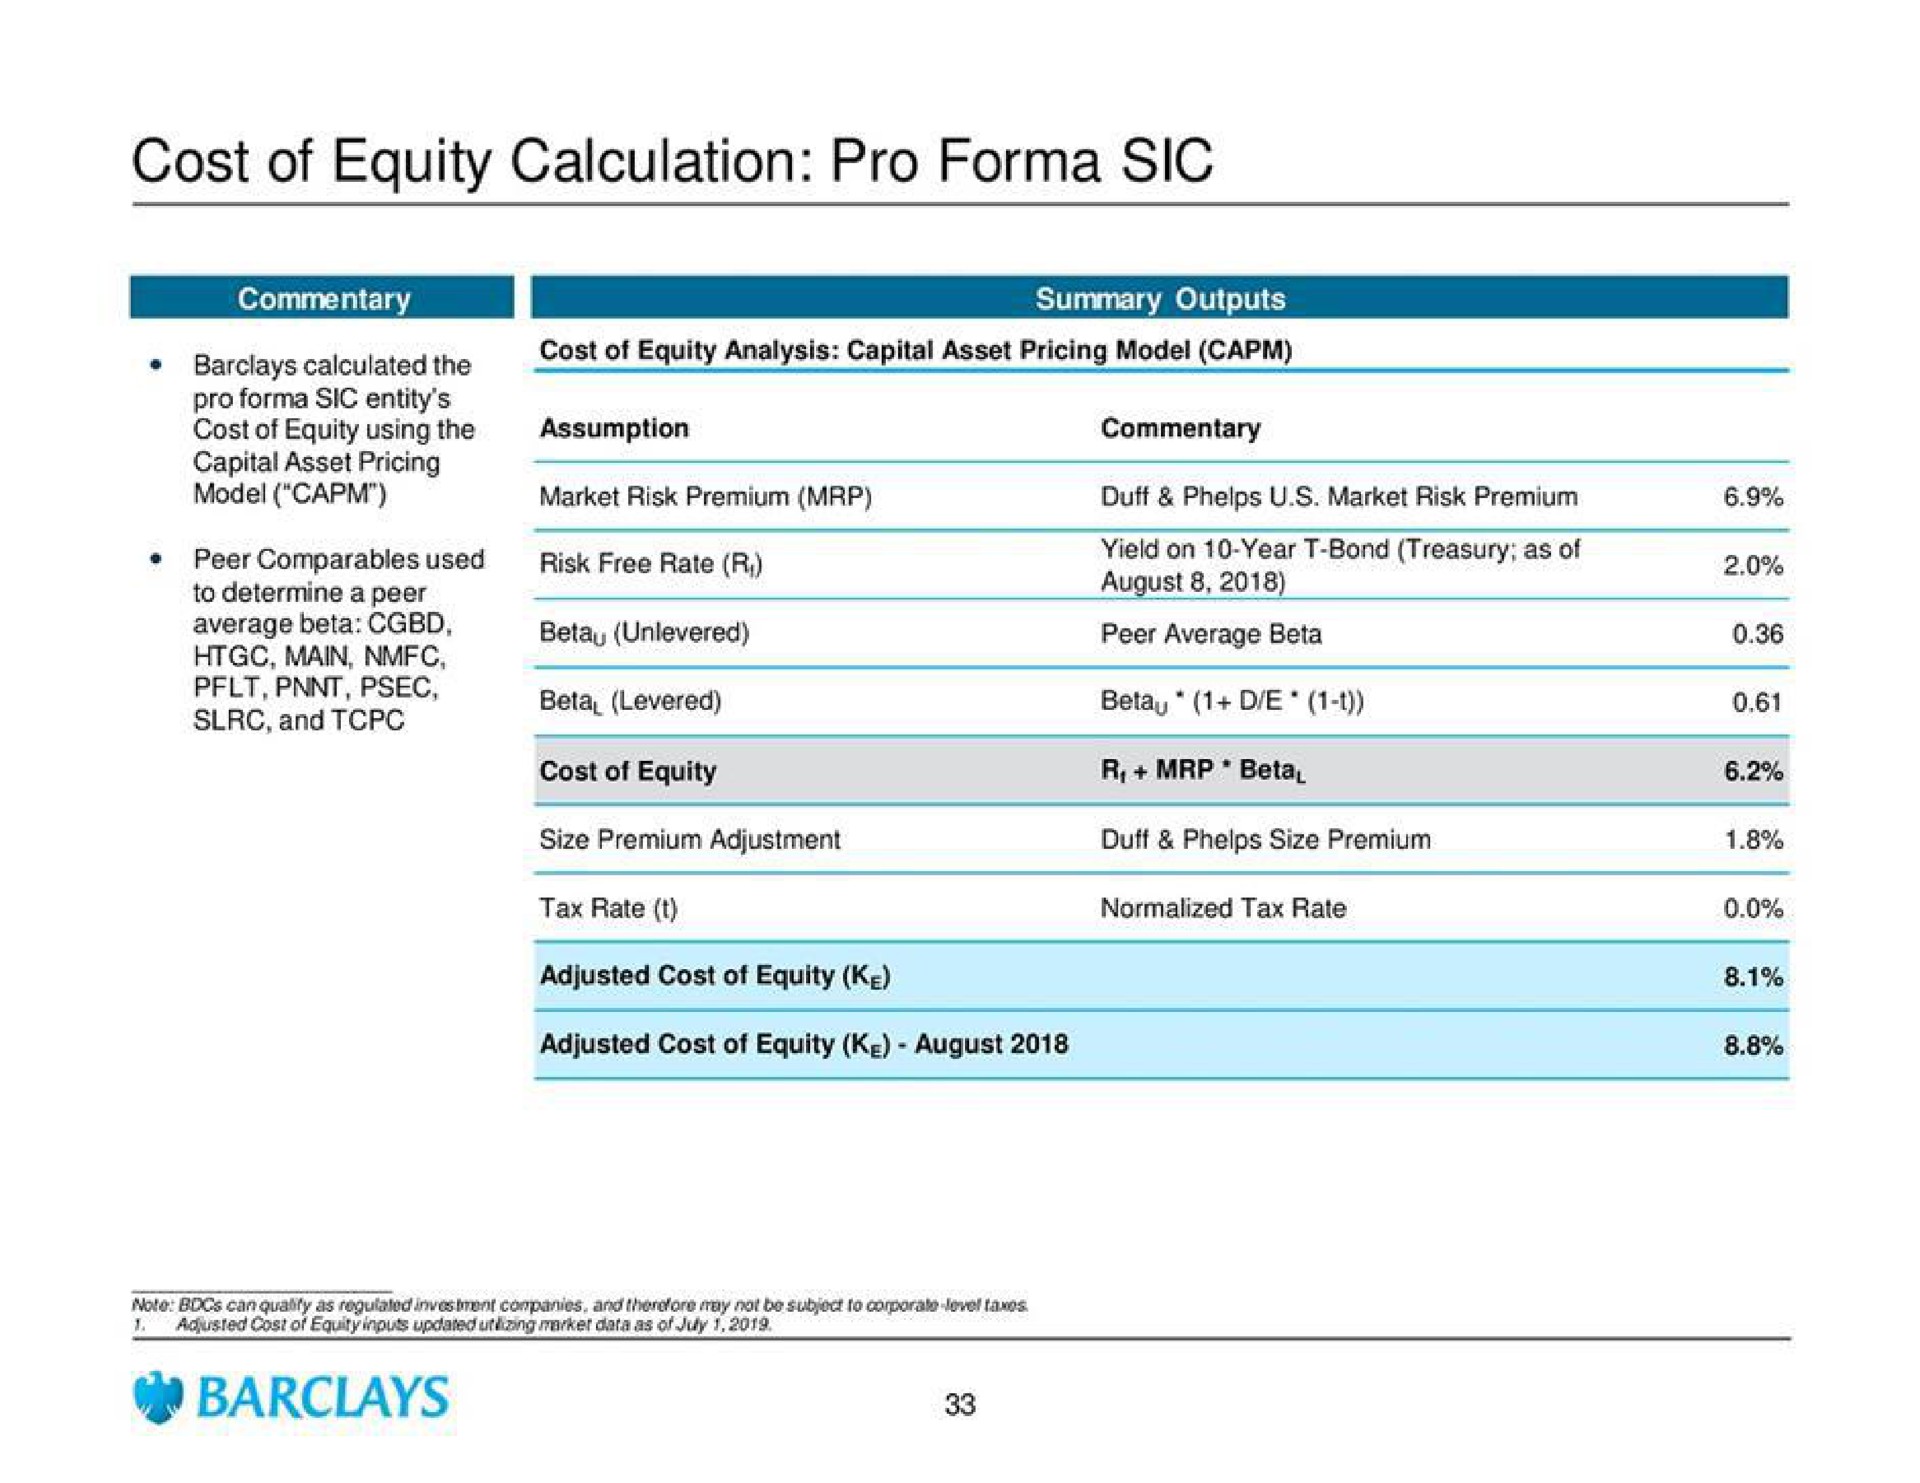 cost of equity calculation pro sic | Barclays